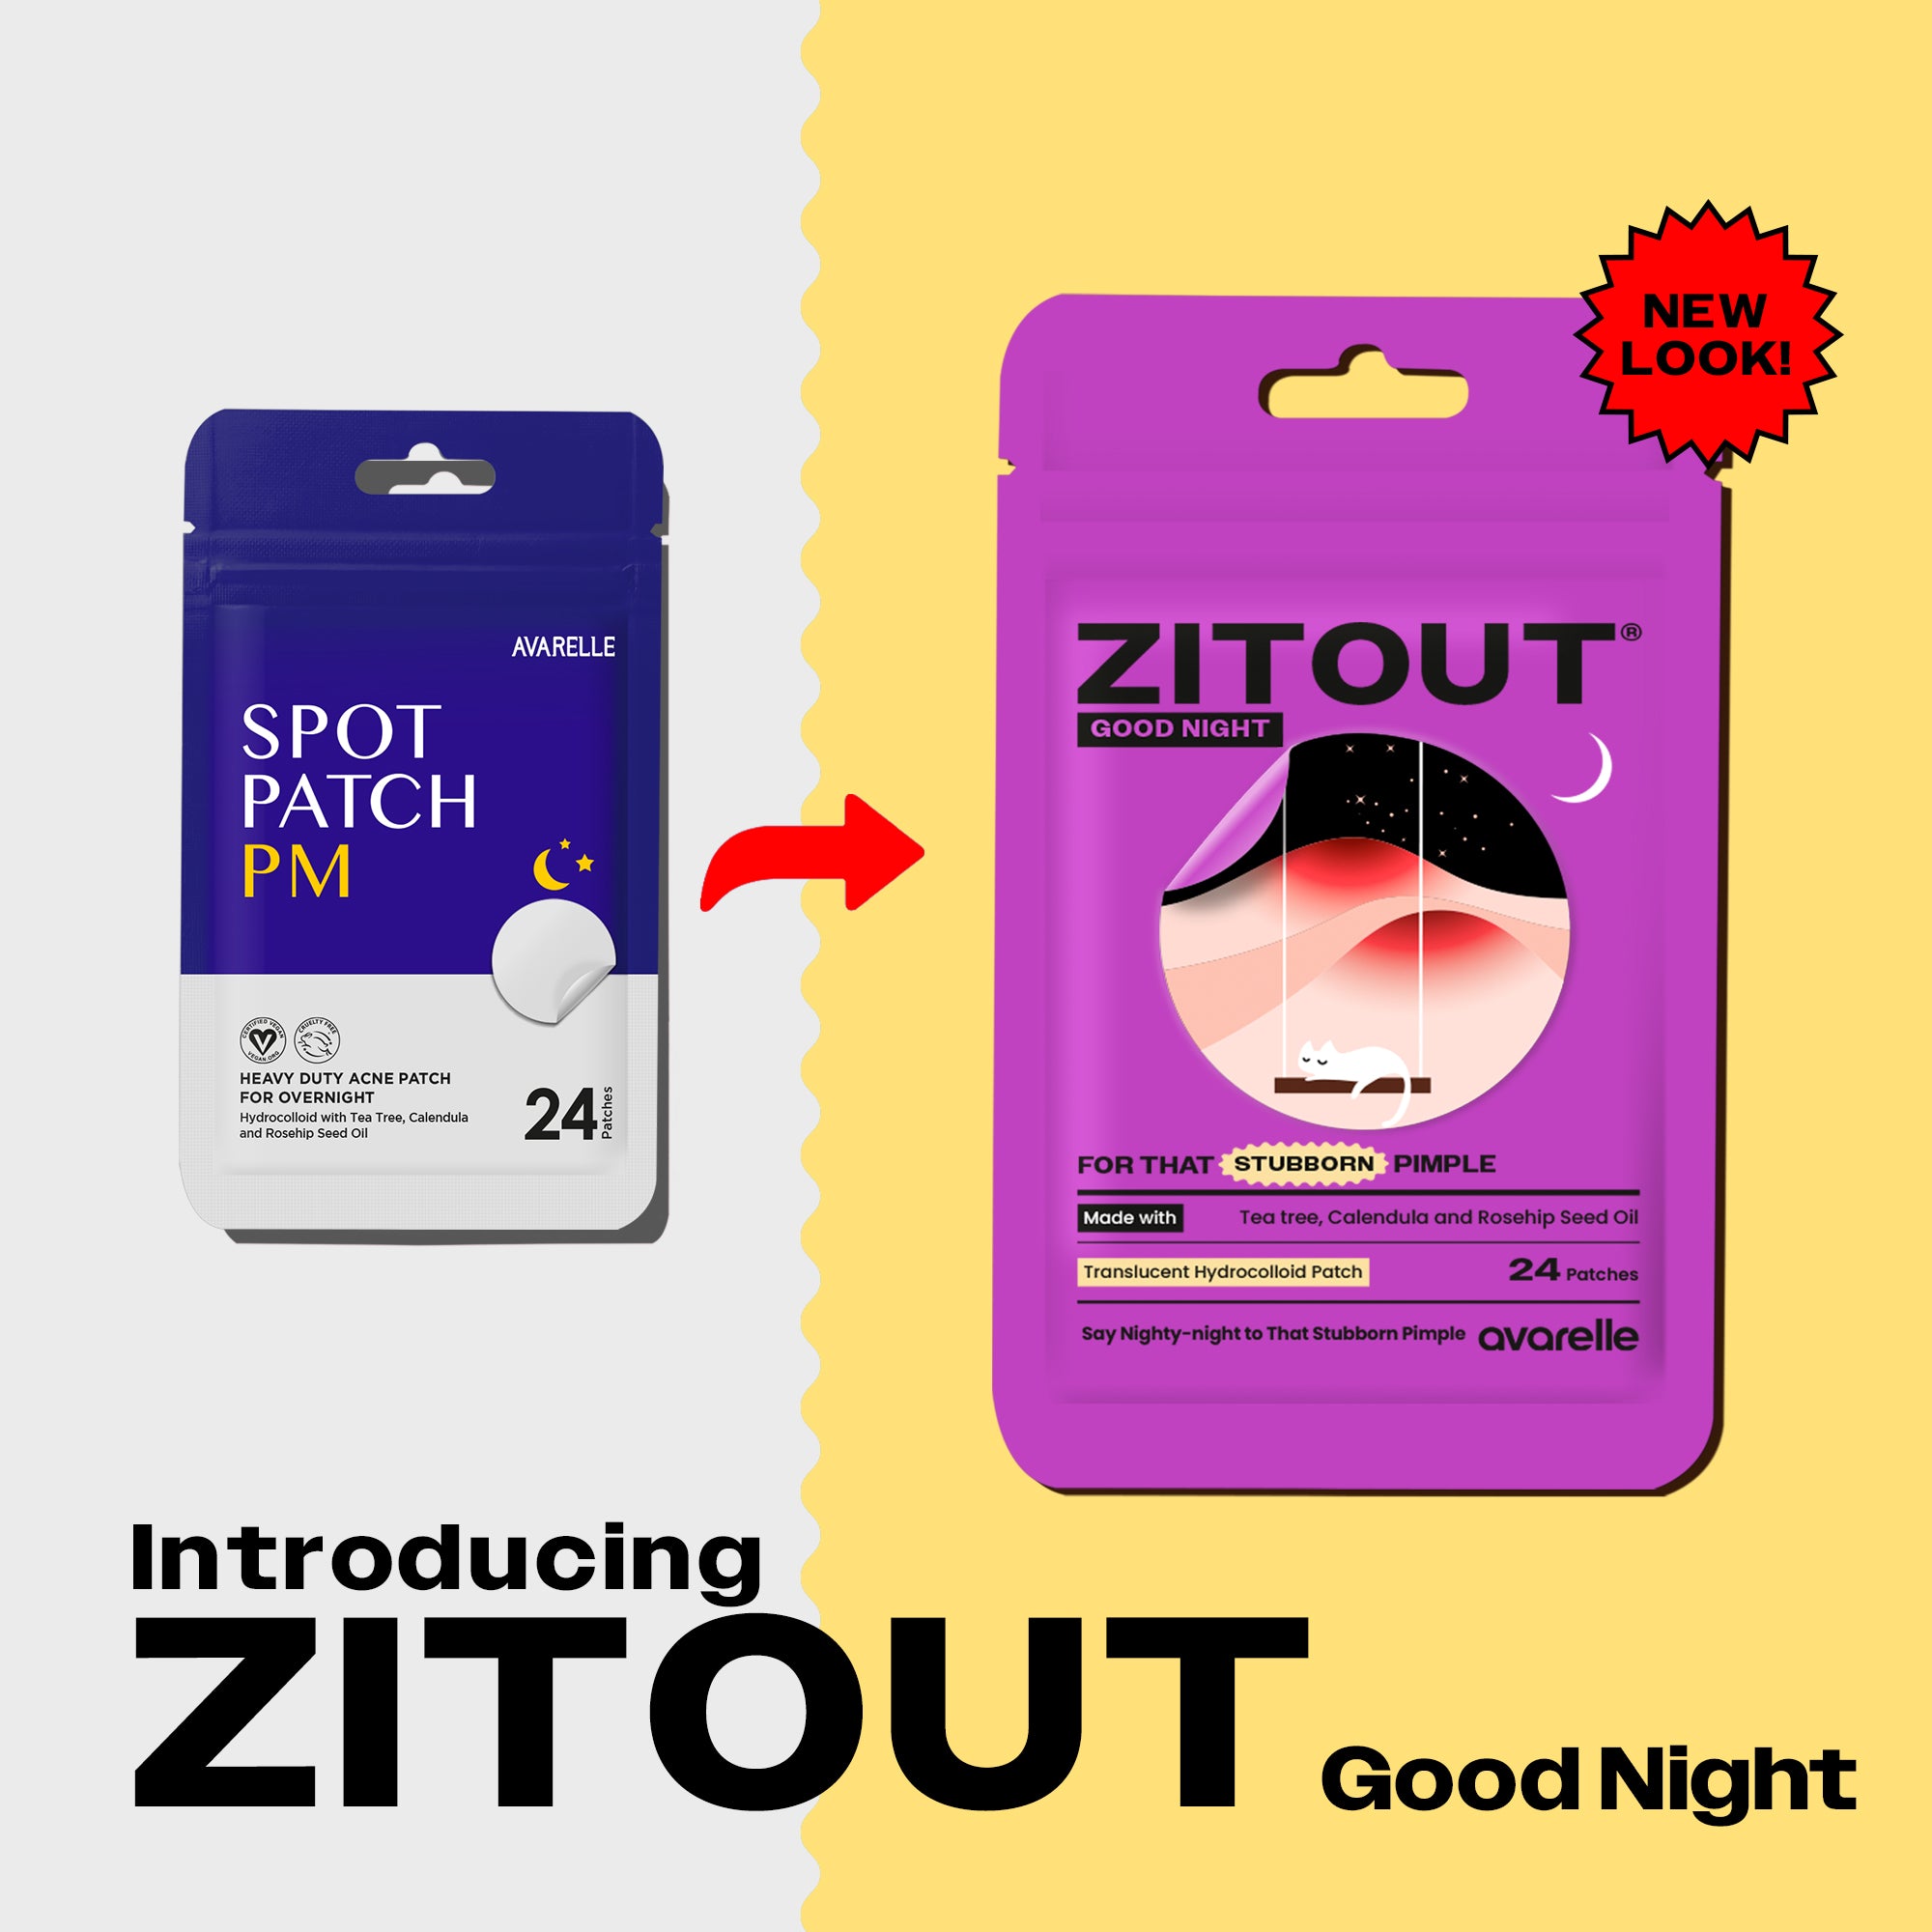 Packaging design evolution of Avarelle's ZITOUT GOOD NIGHT (PM) from an older version to a new look, highlighting product features and quantity.